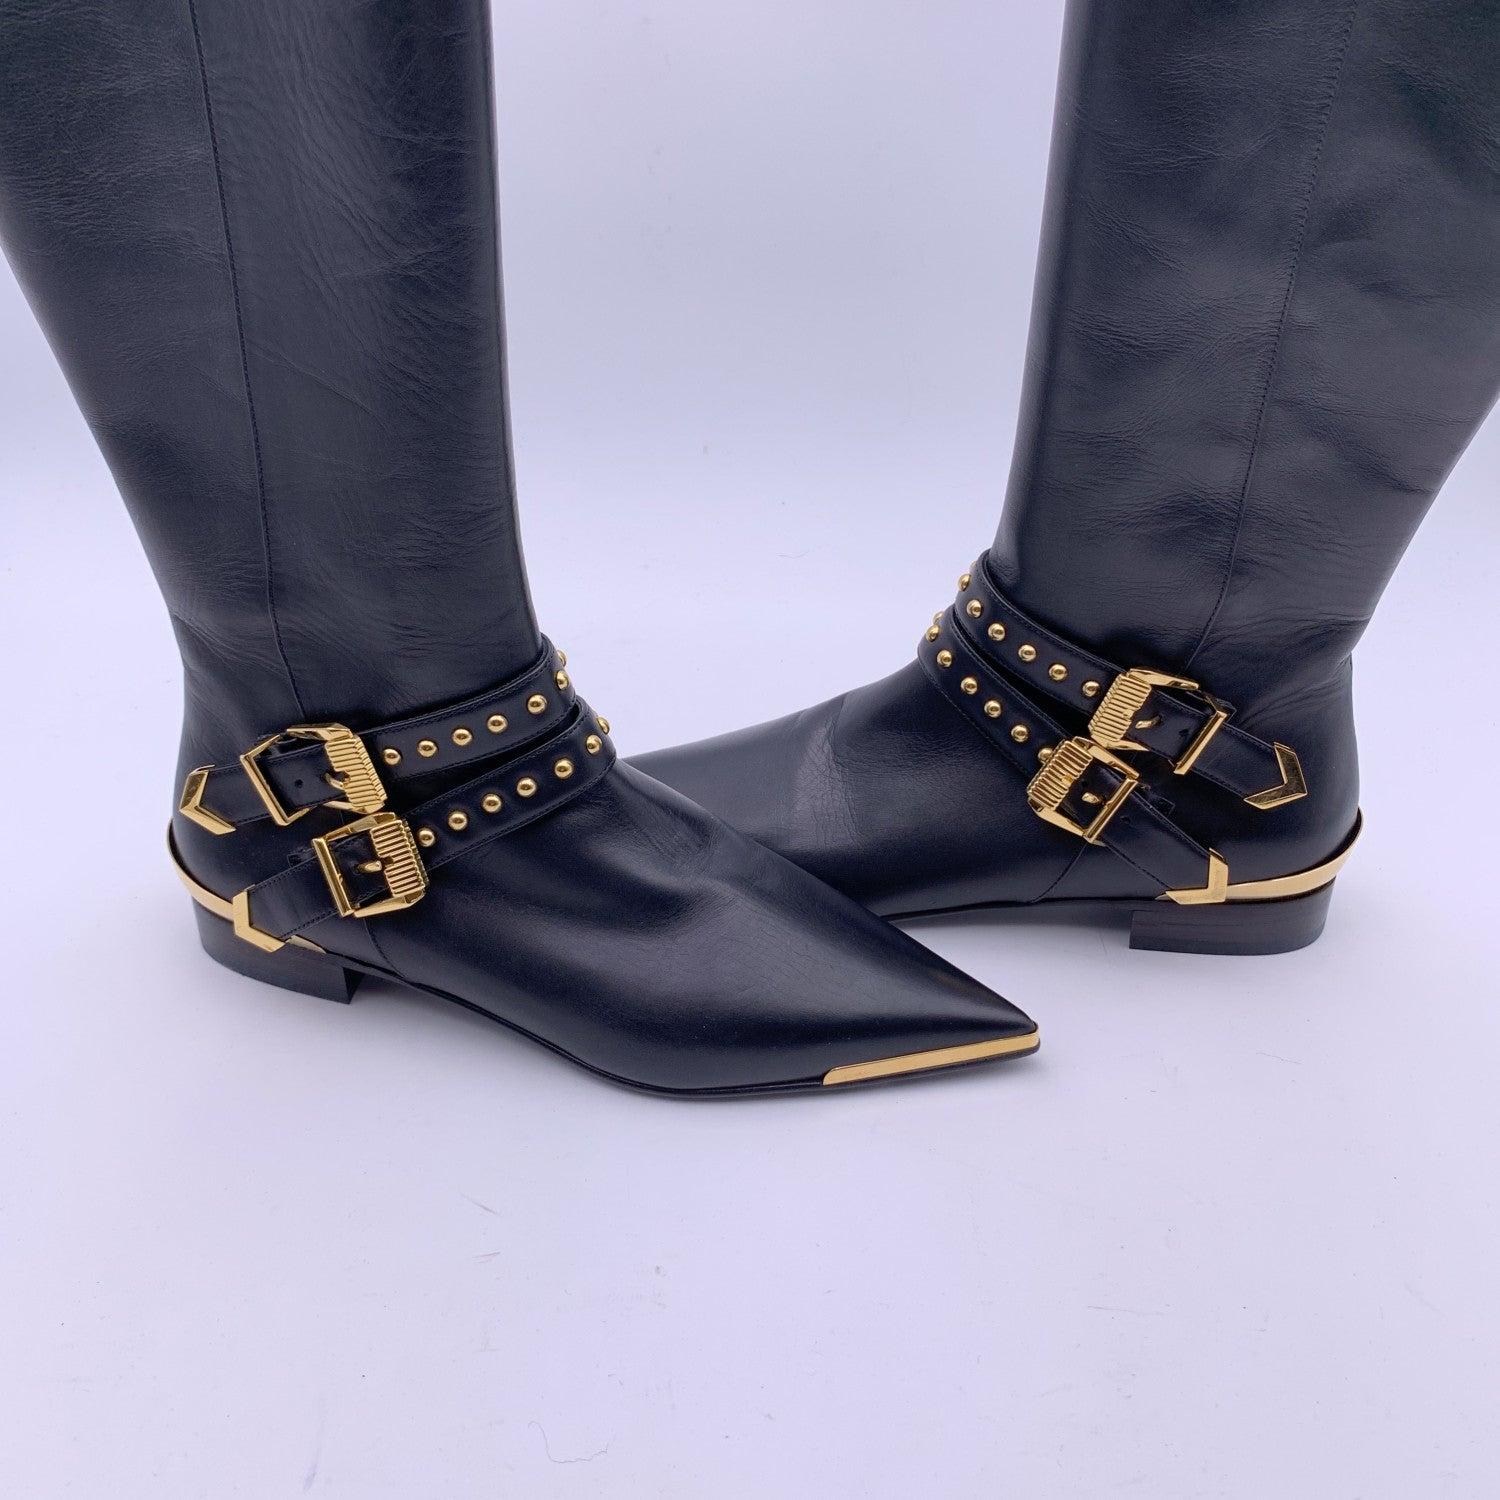 Versace Black Leather Riding Boots with Gold Metal Buckles Size 36 For Sale 1